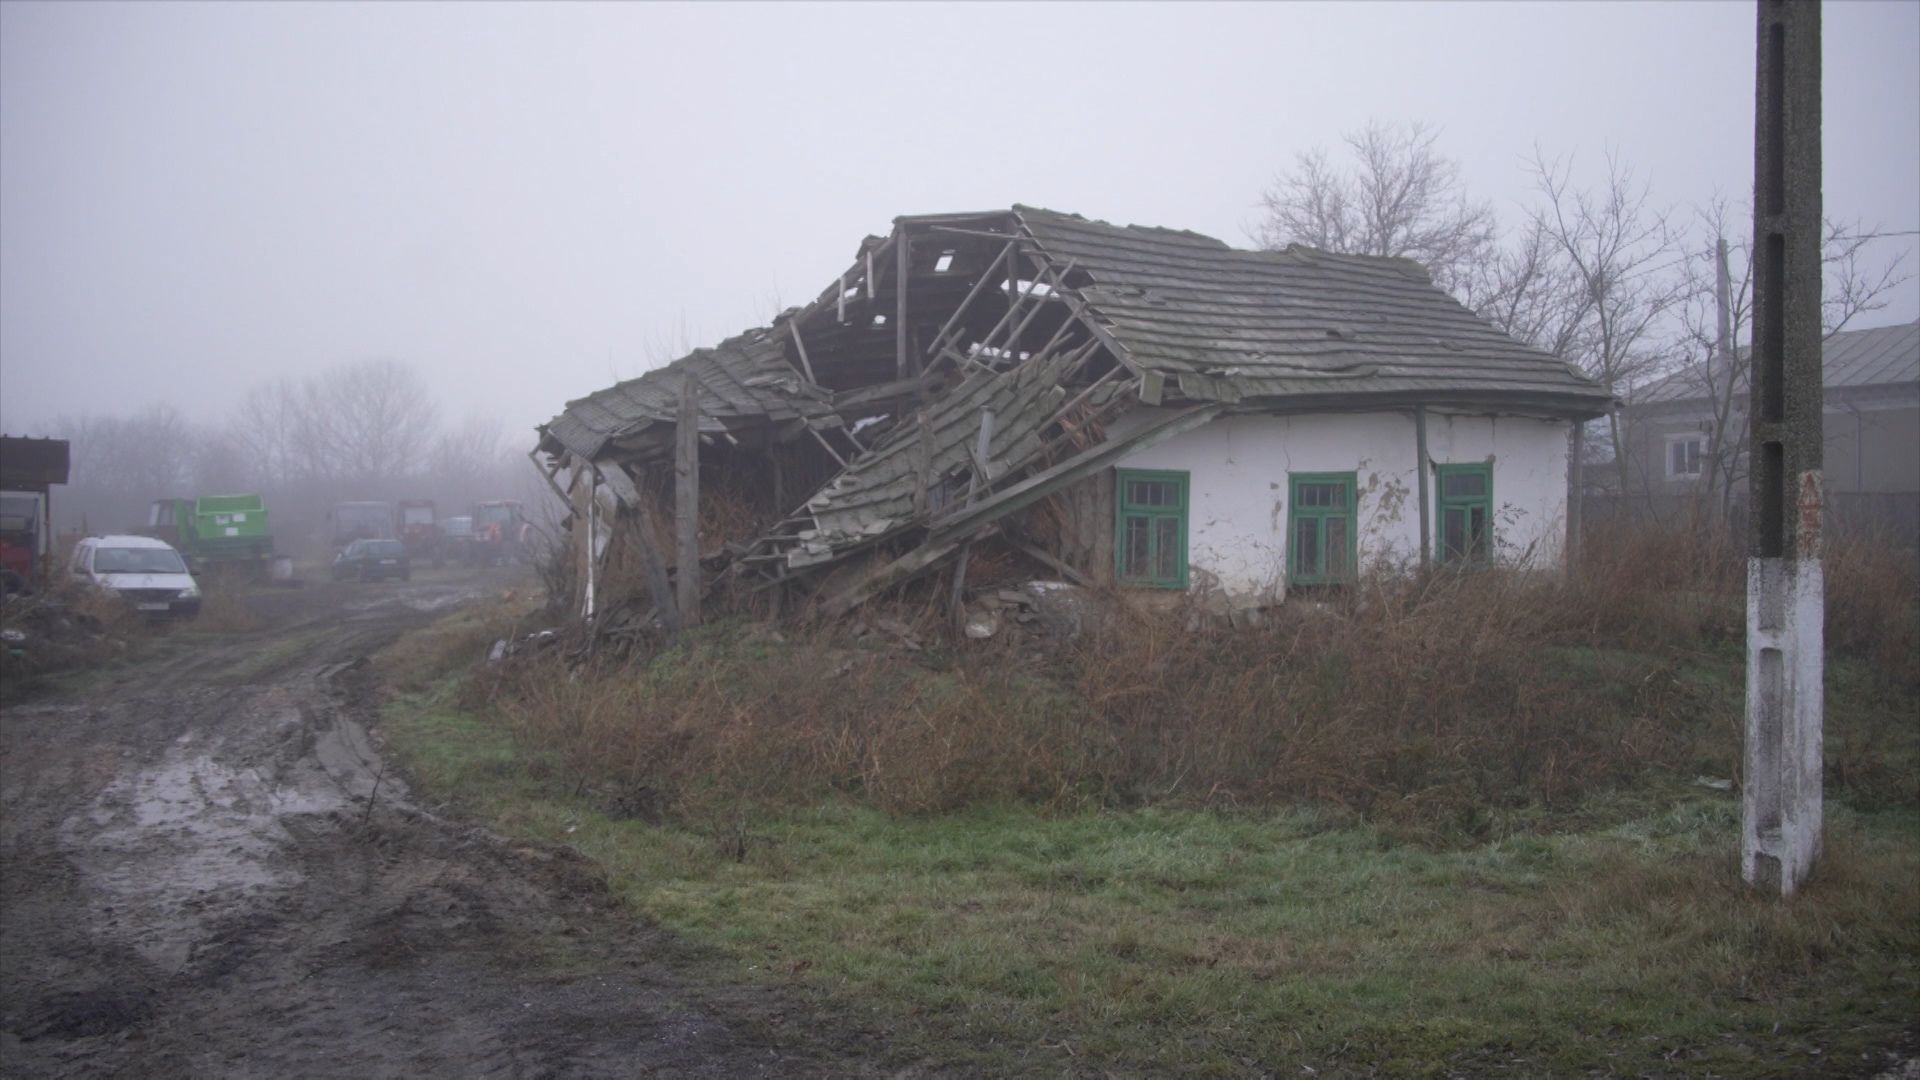 Villagers in Plauru are worried that Russian drones could fall on their homes if they're shot down by Ukrainian forces